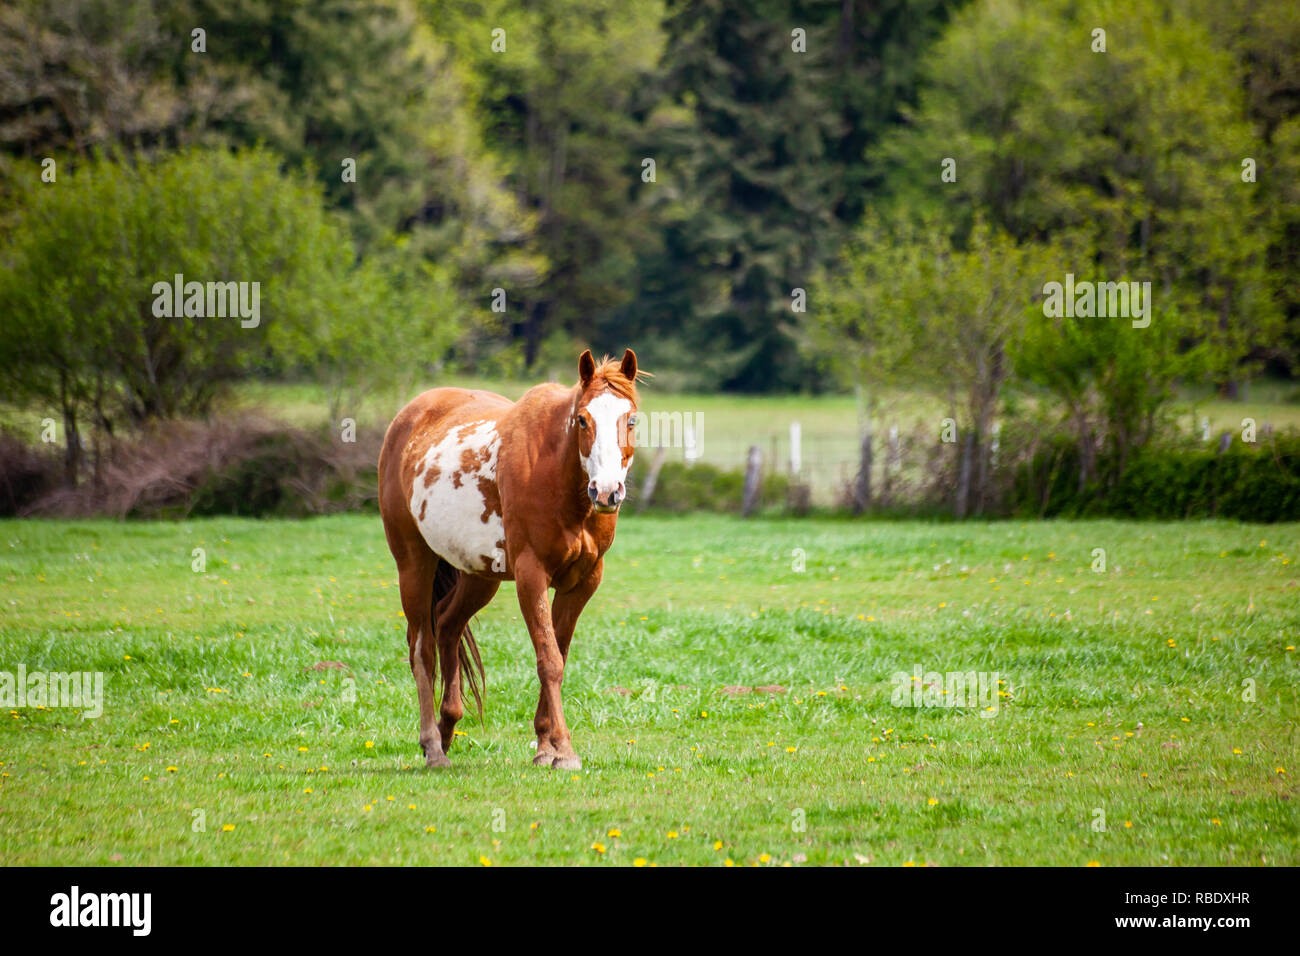 A brown and white sorrel pinto horse with  bald face and heterochromia iridium eyes walking in a spring pasture meadow Stock Photo